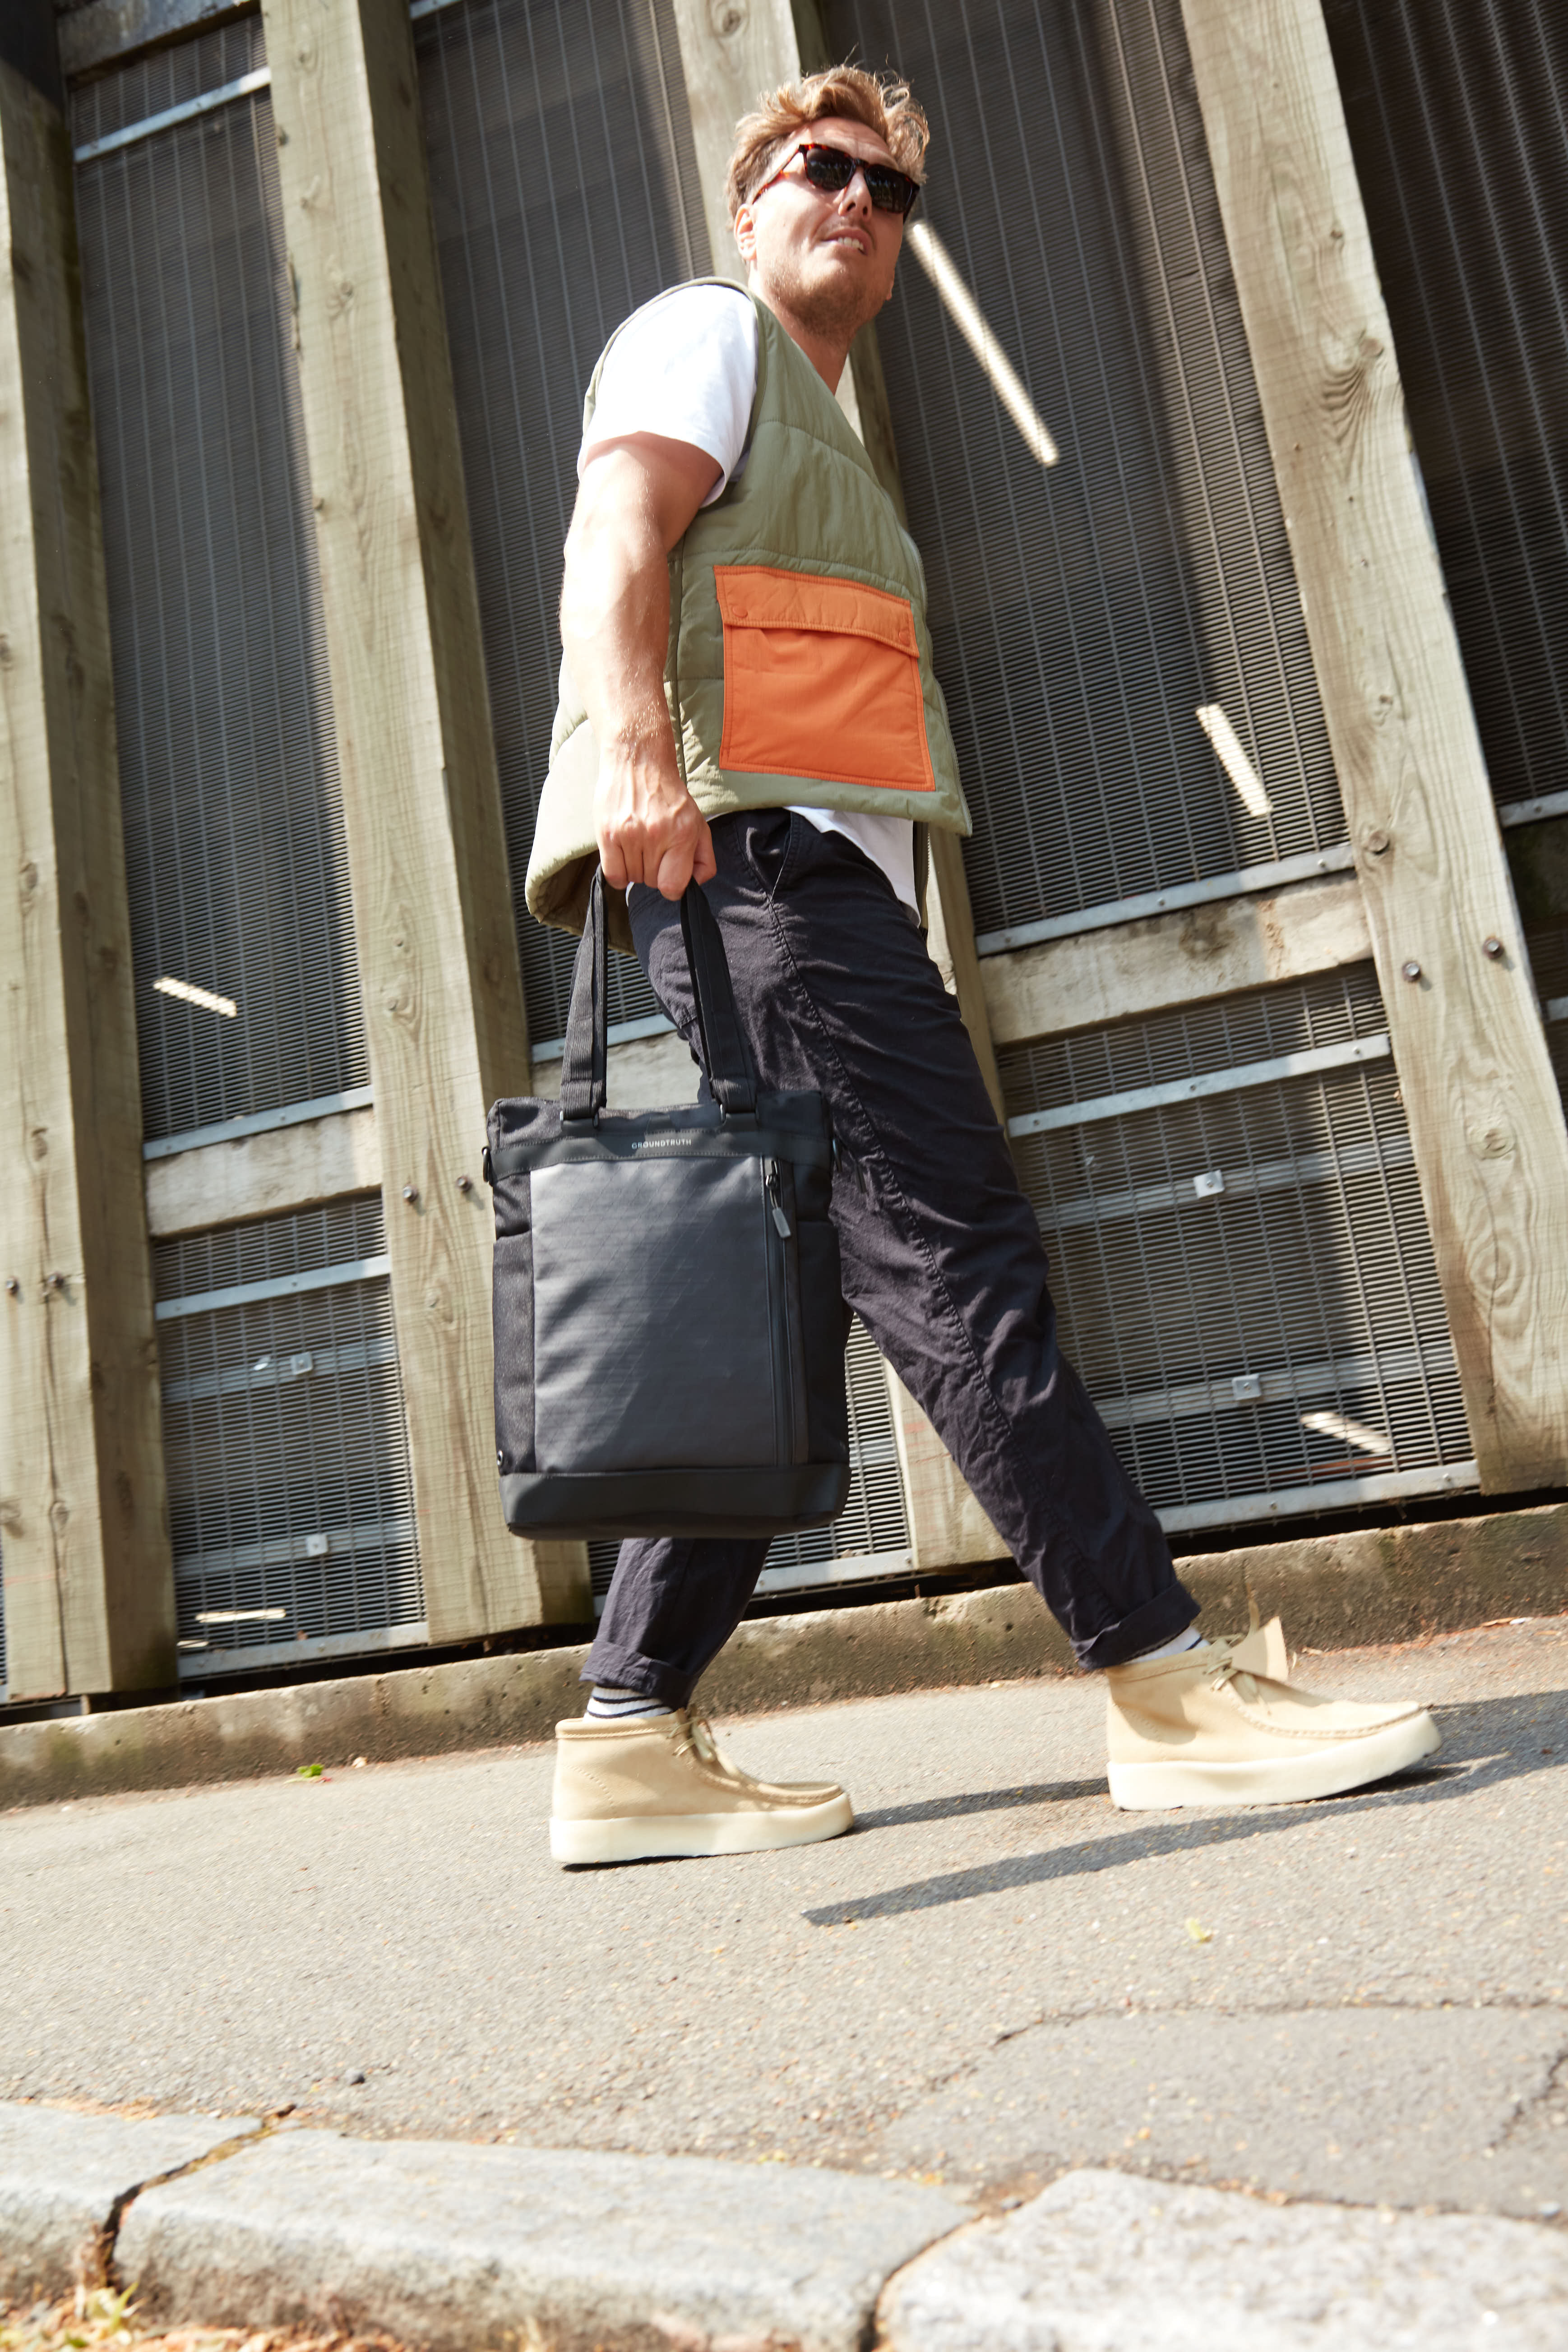 Groundtruth RIKR 10L Tote Pack